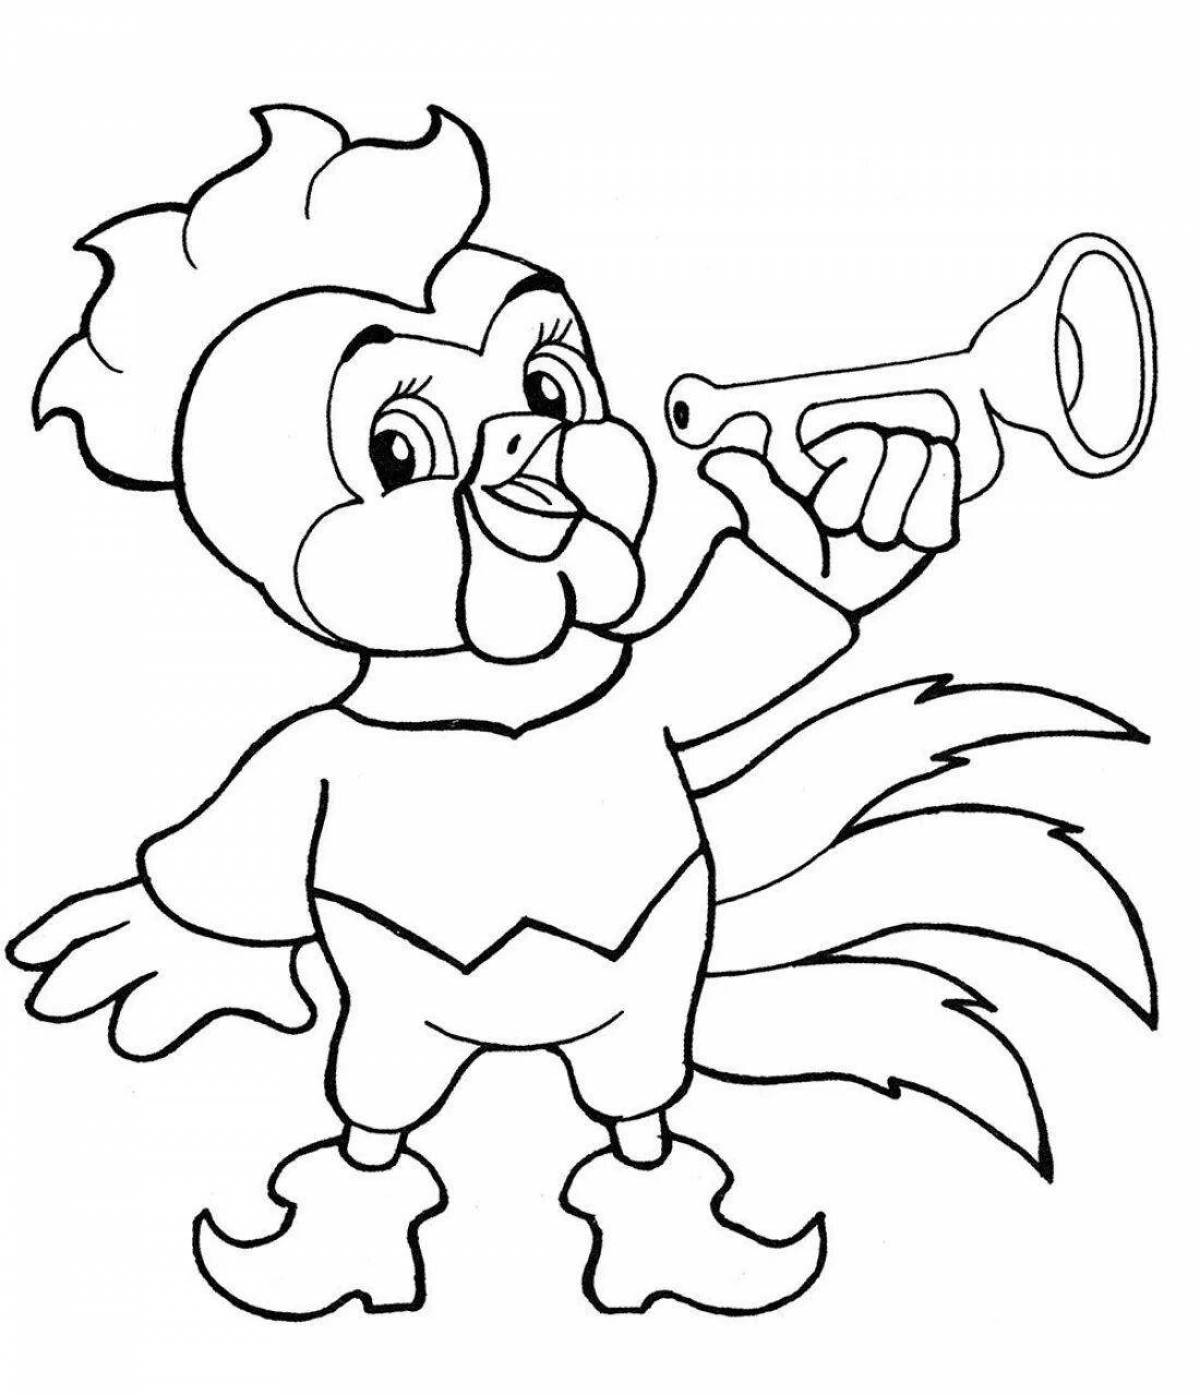 Chicken with pipe #3